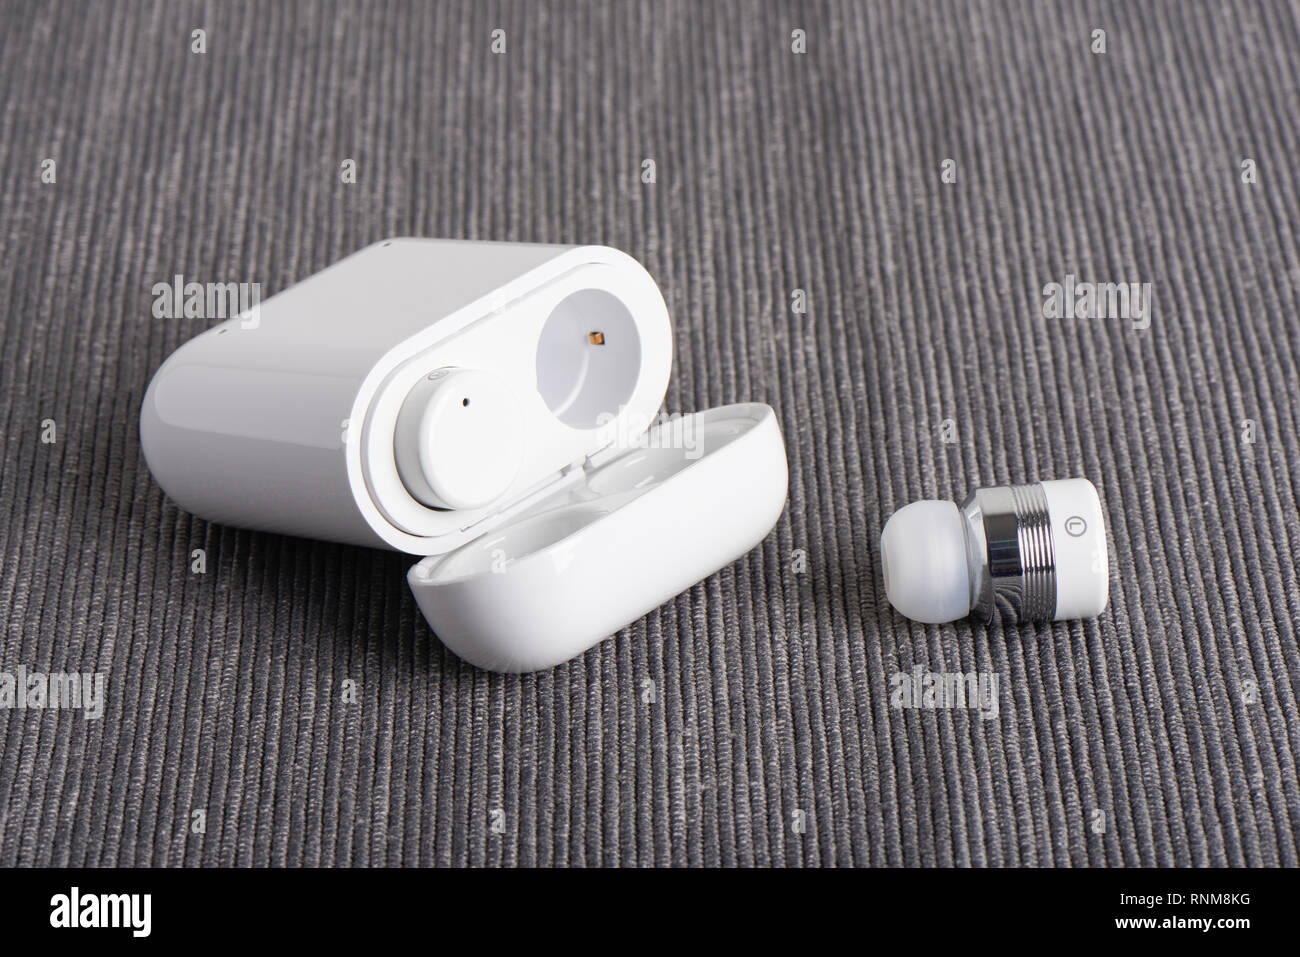 wireless cordless bluetooth earbuds with chargeable case on a fabric background Stock Photo